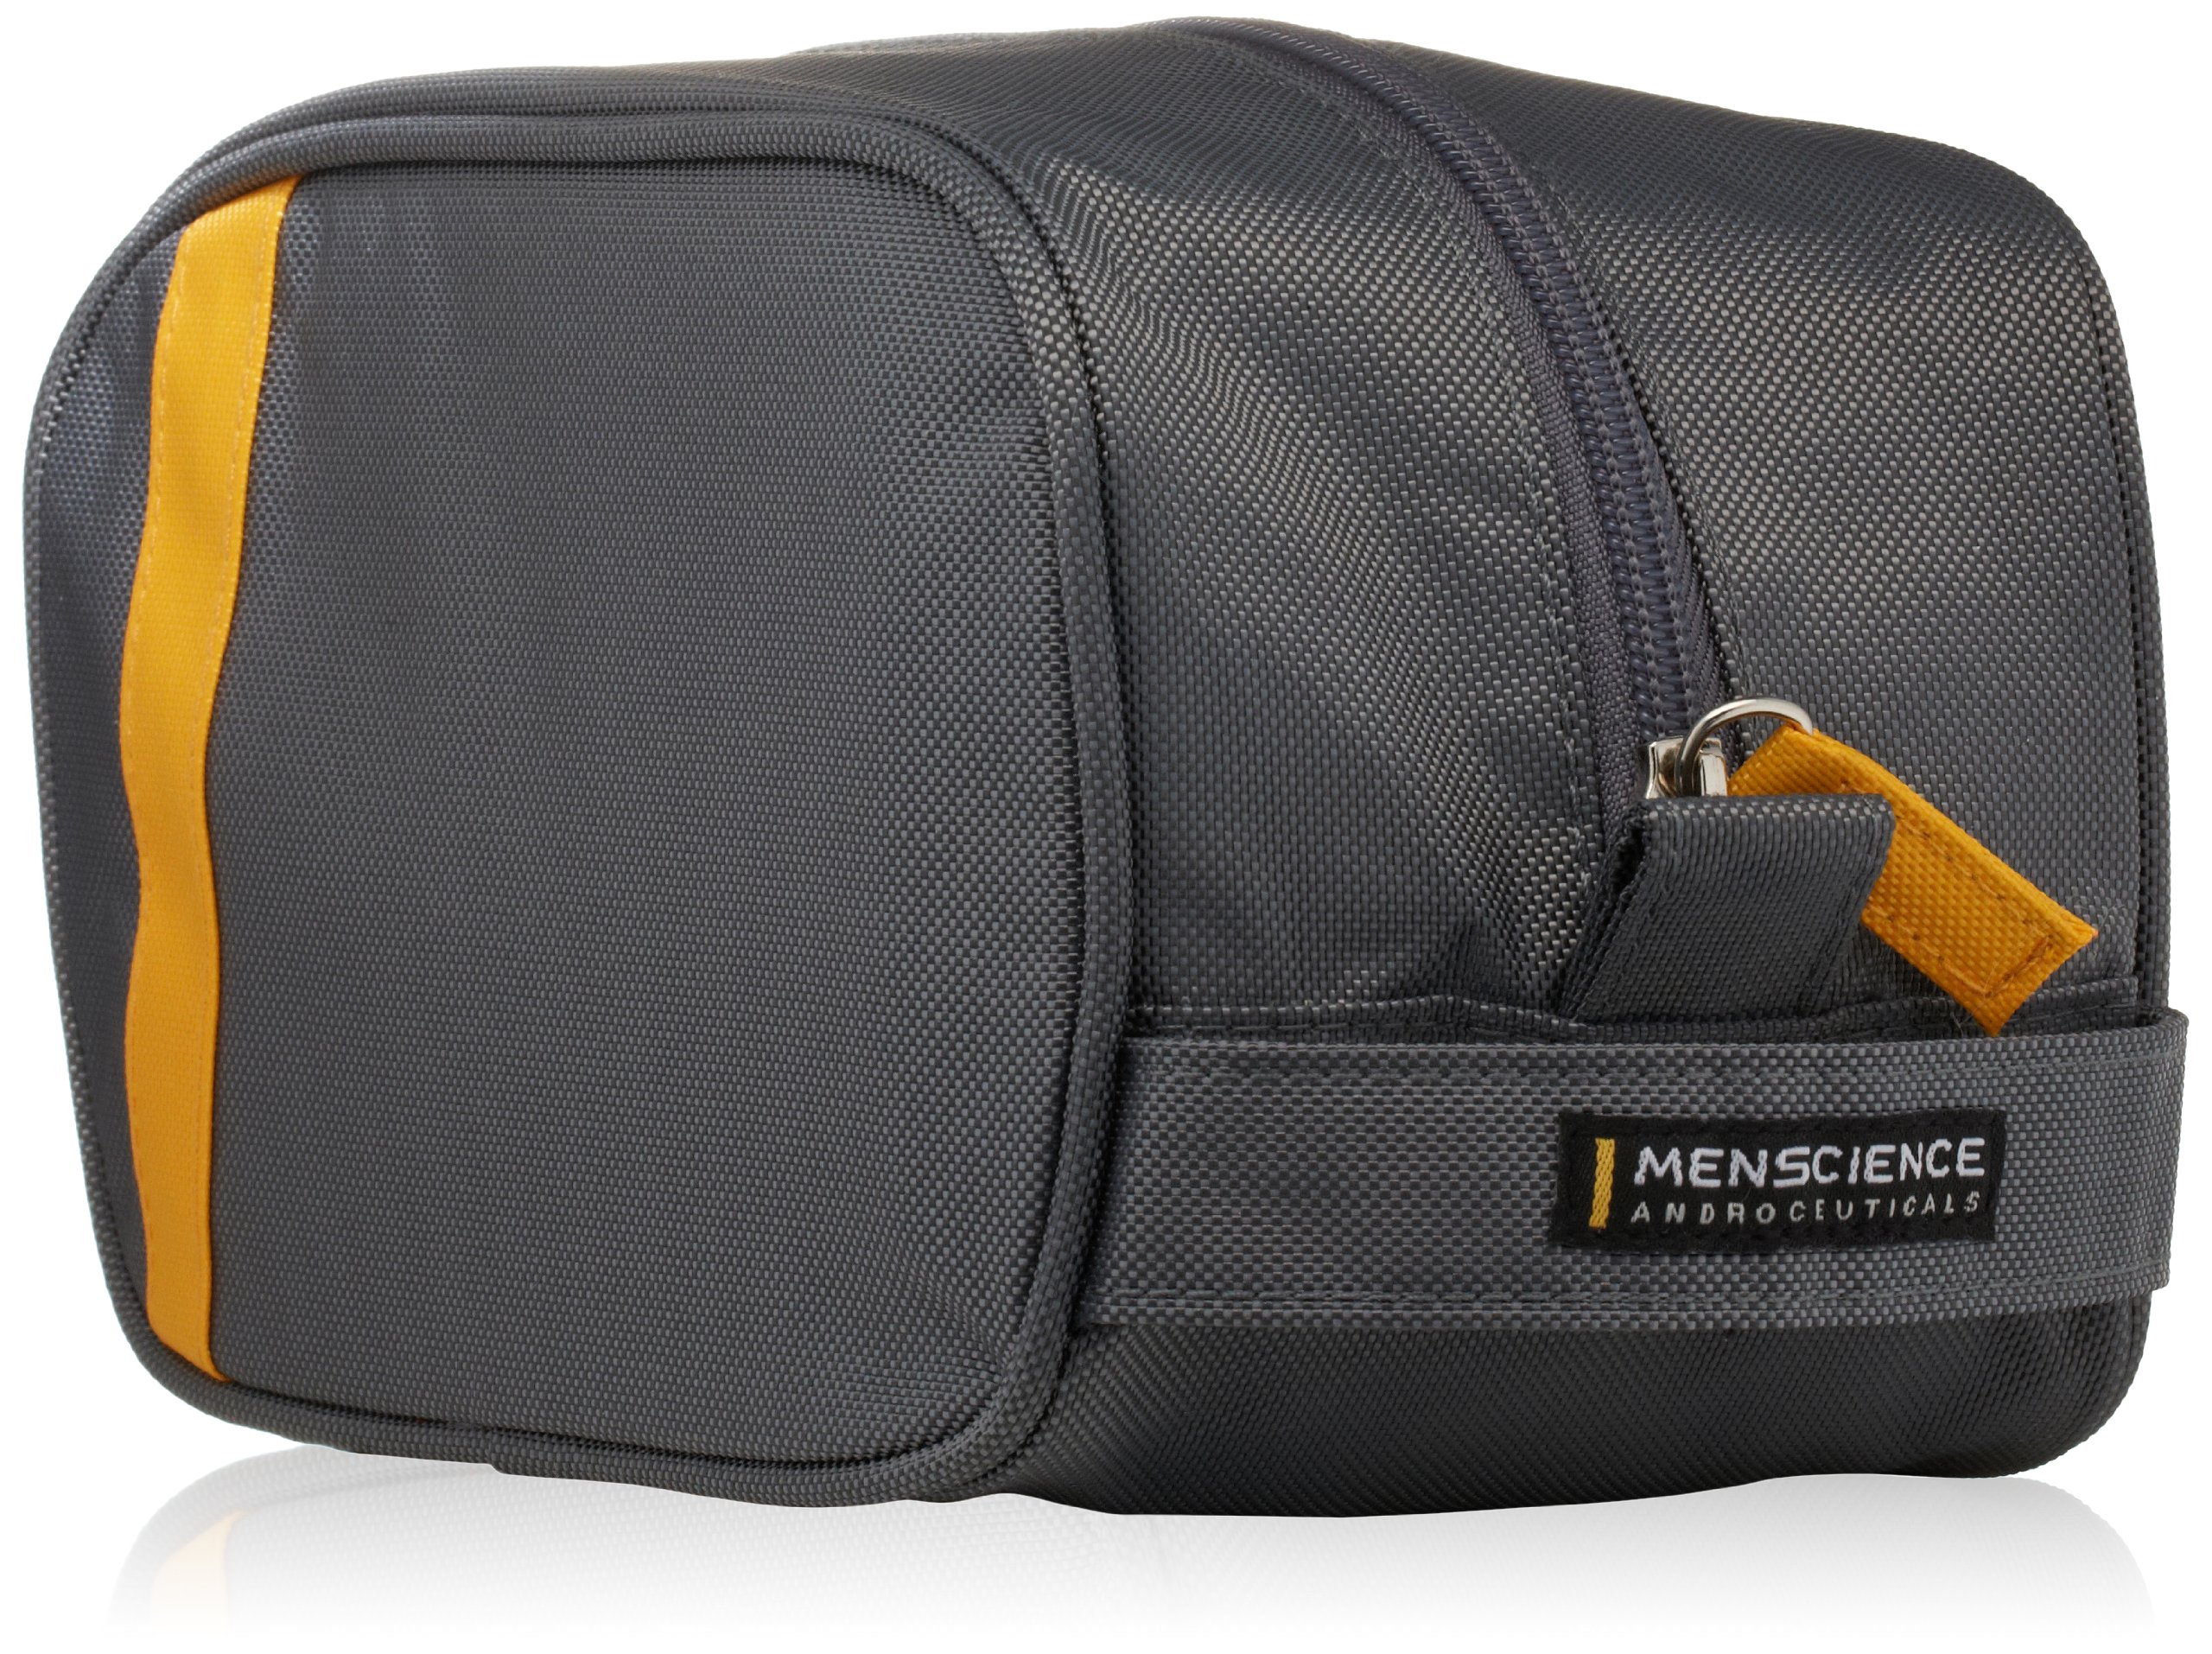 MenScience Androceuticals Personal Travel Bag